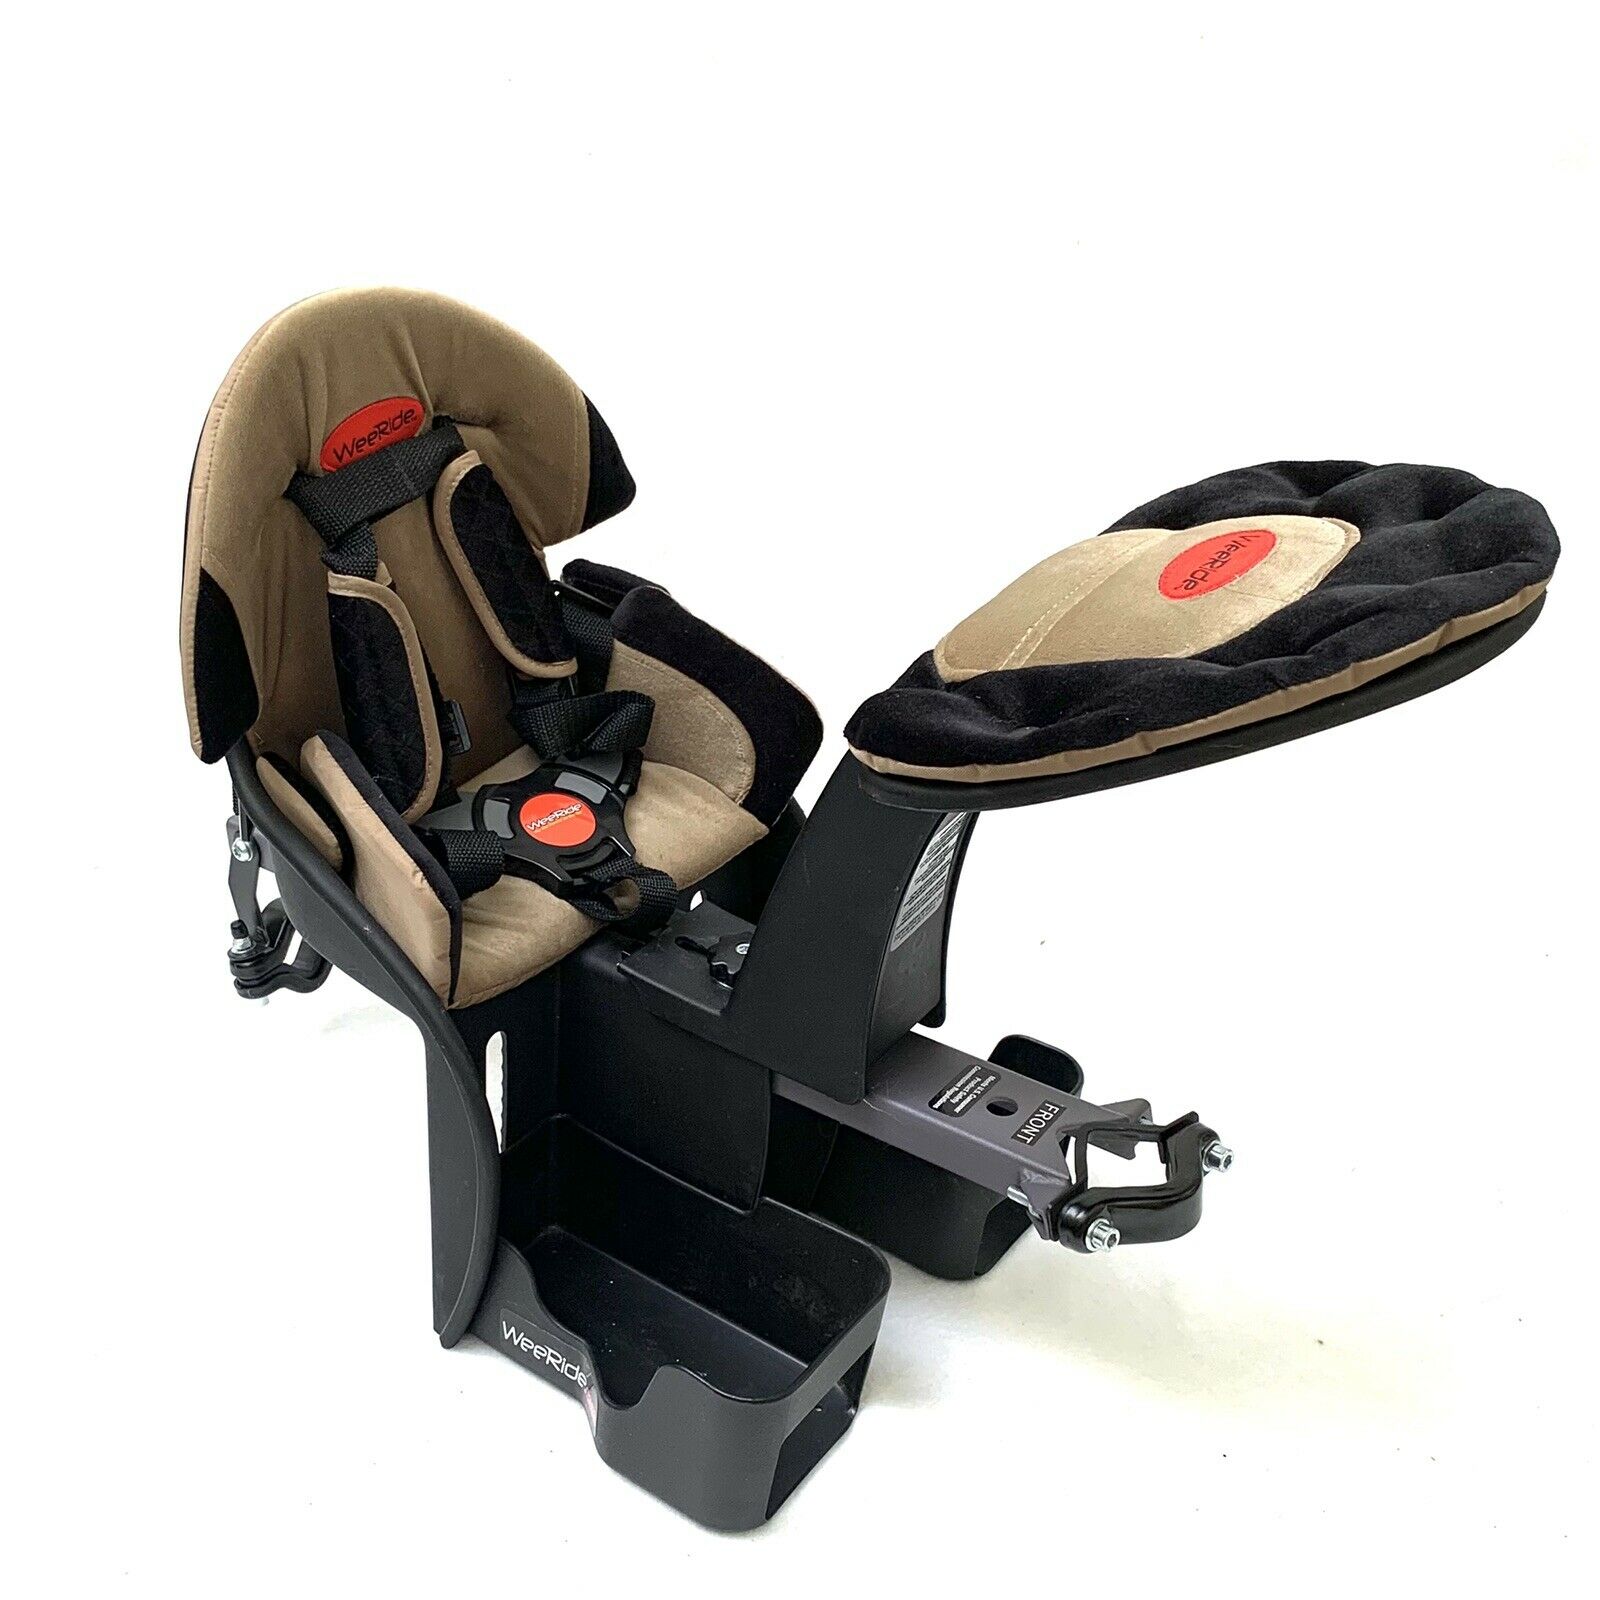 Weeride Center Front Mounted Bicycle Kangaroo Child Carrier Bike Seat, Head Rest